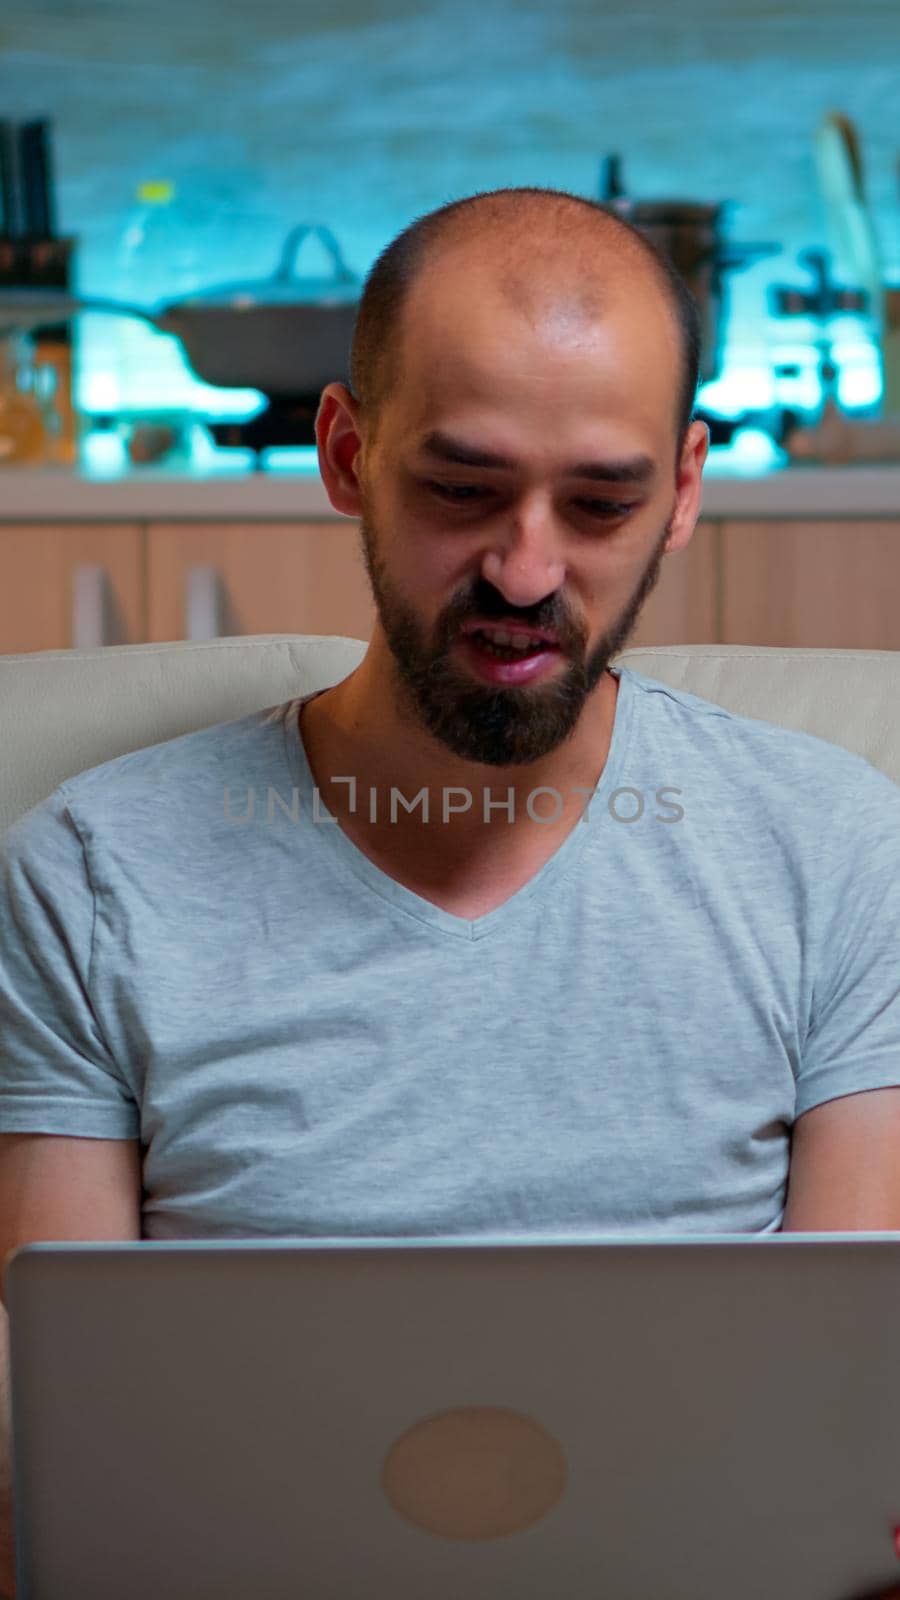 Caucasian male sitting on couch in pajamas working on laptop computer during videocall conference. Comfortable man relaxing on sofa chatting with business people late at night in kitchen